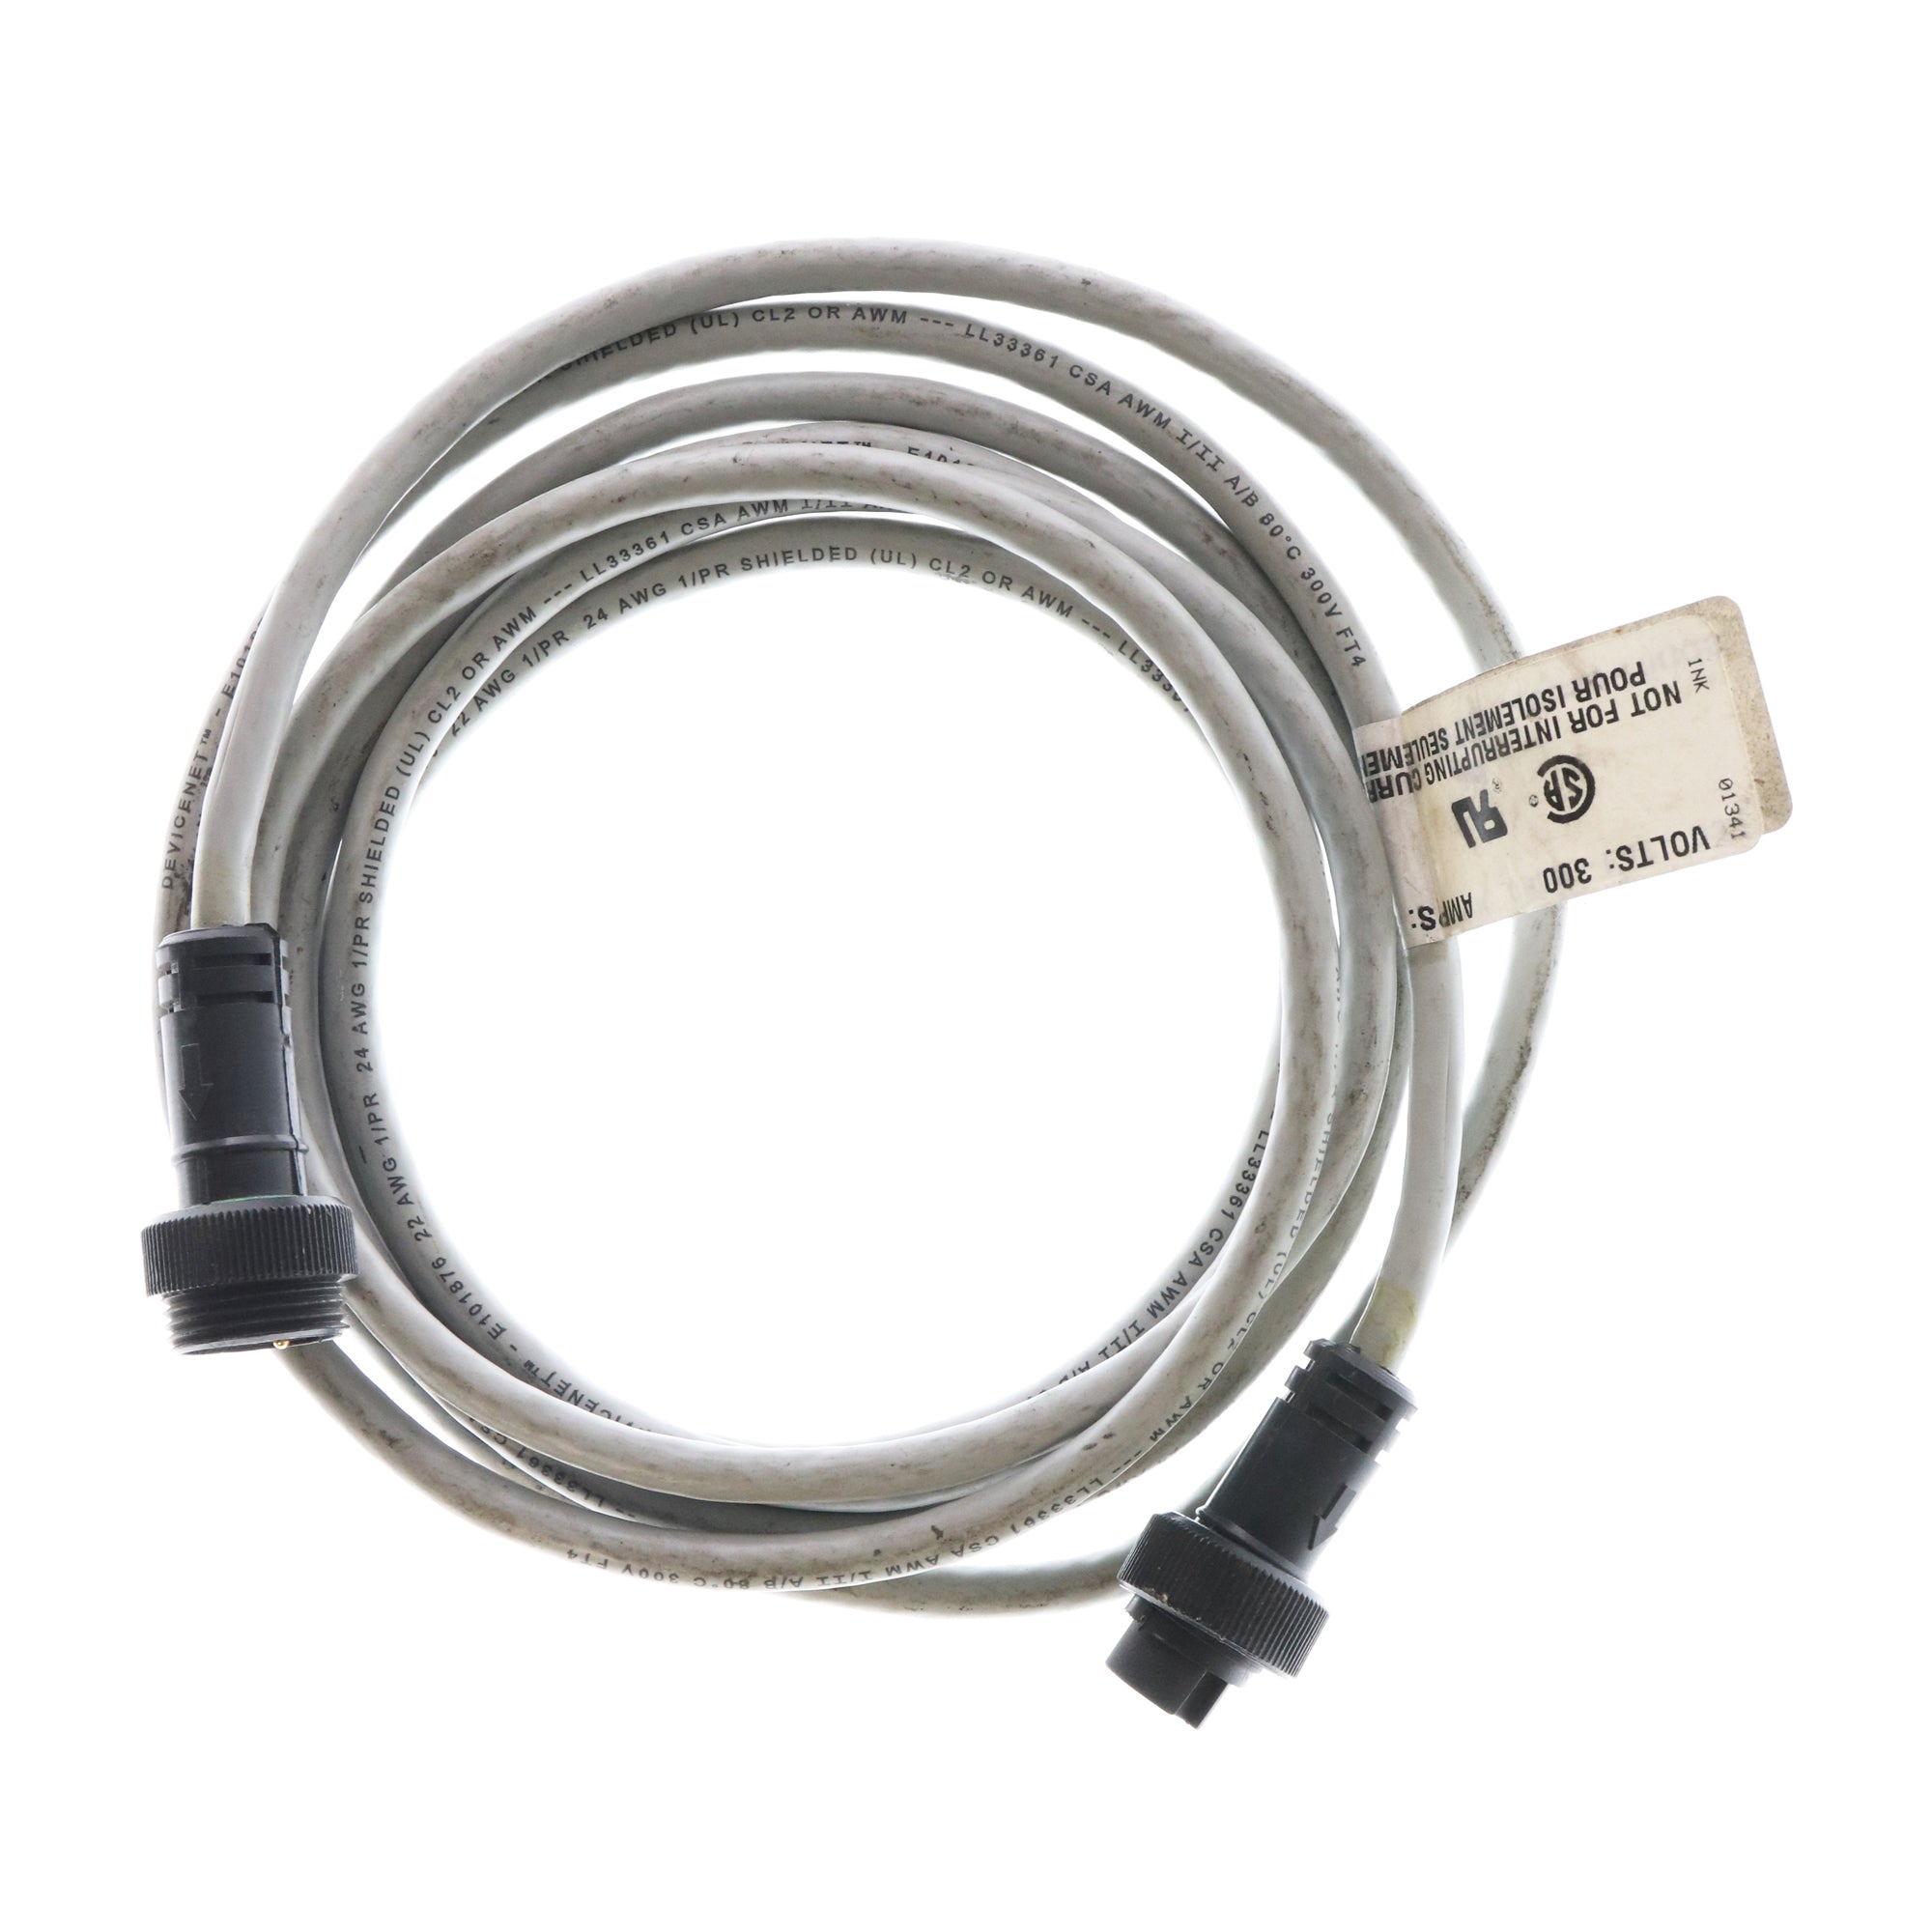 Cooper, COOPER CROUSE-HINDS CHDN-EAE-D3 MINI-LINE 5P DEVICENET CABLE ASSEMBLY